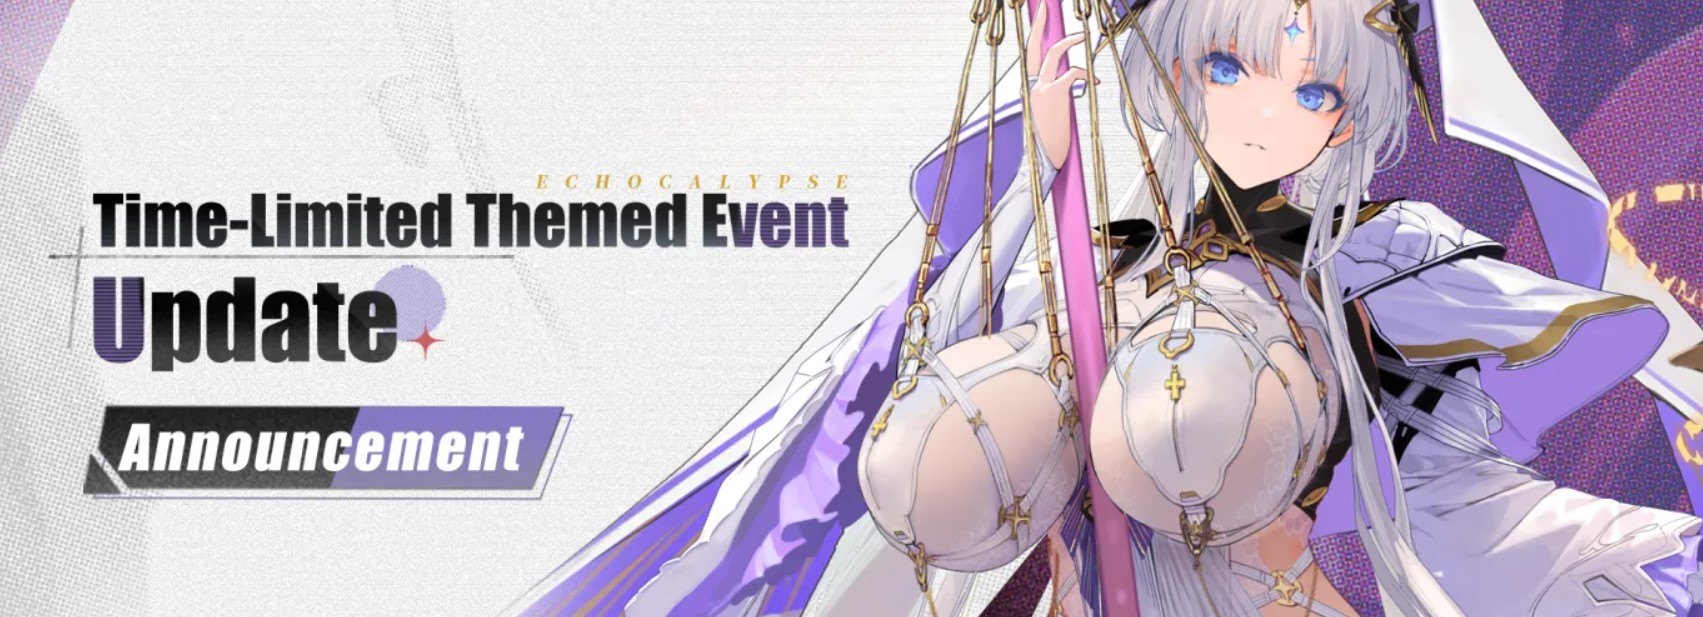 Echocalypse: Scarlet Covenant – New SSR Case Levia, New Events, and more with Heavenly Empowerment Update